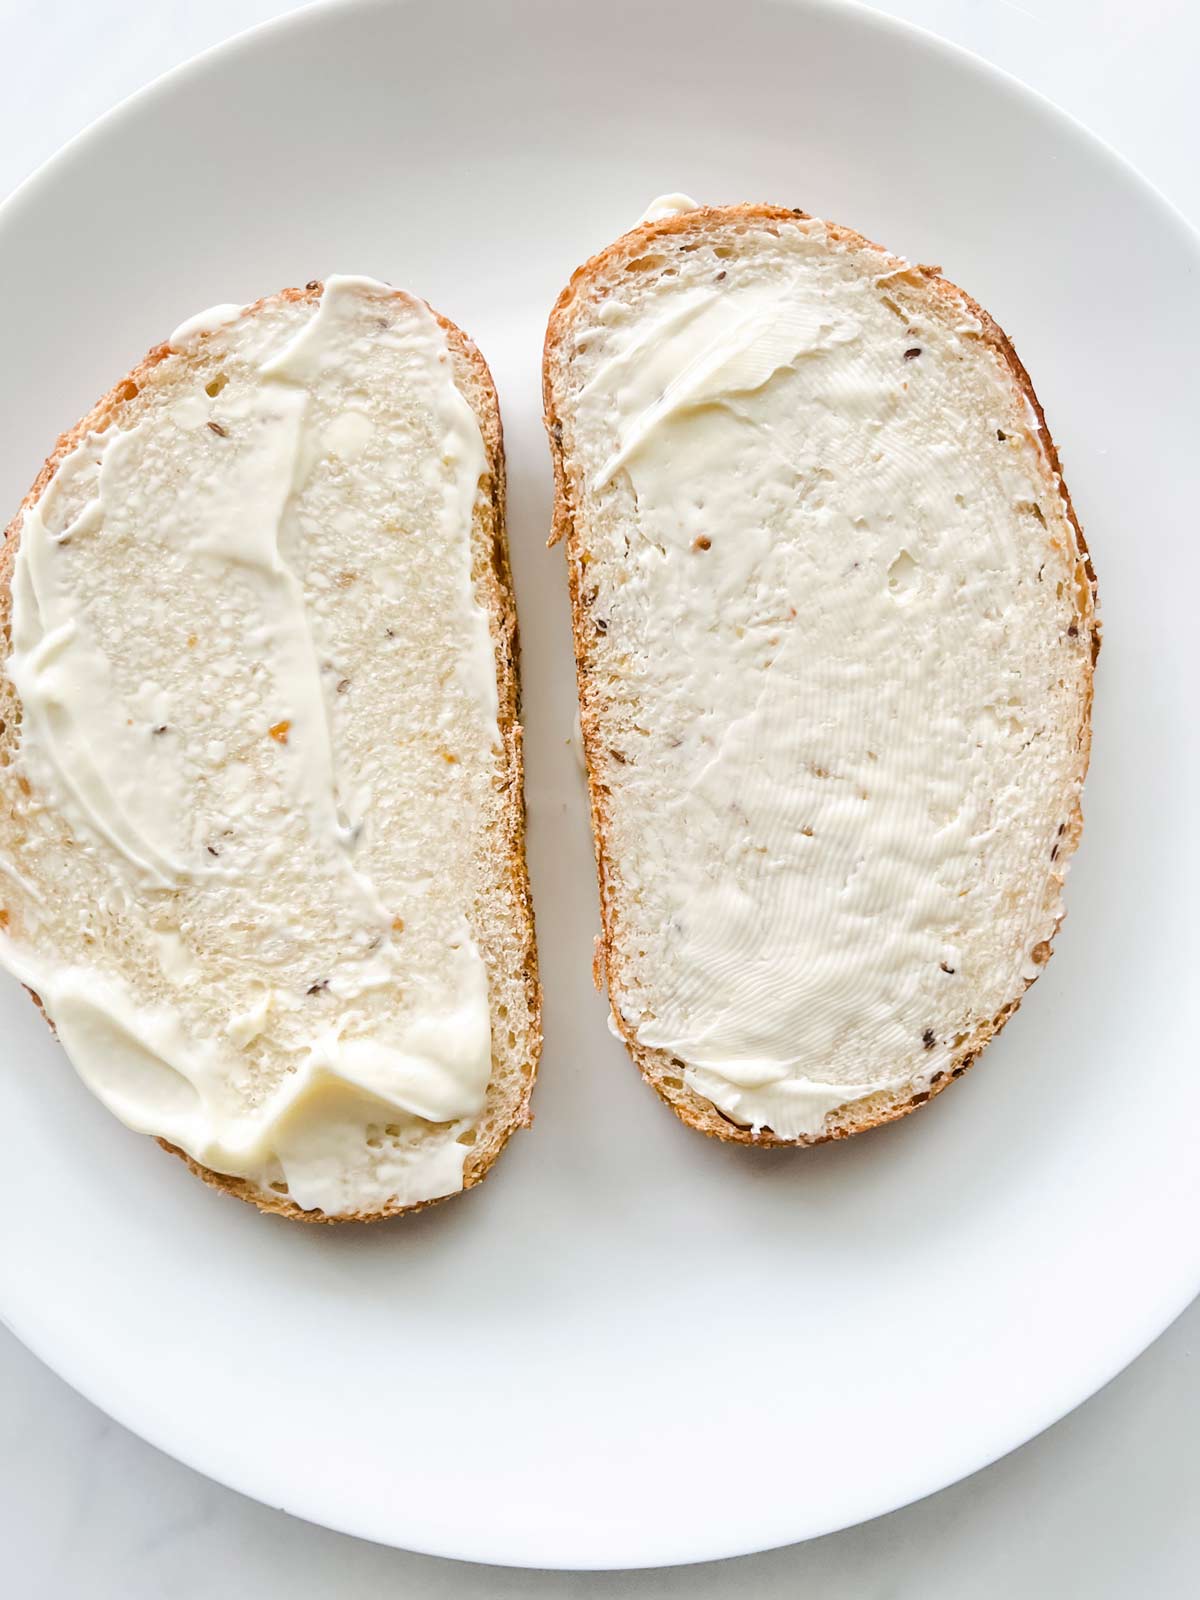 Photo of two slices of bread with mayonnaise on them.